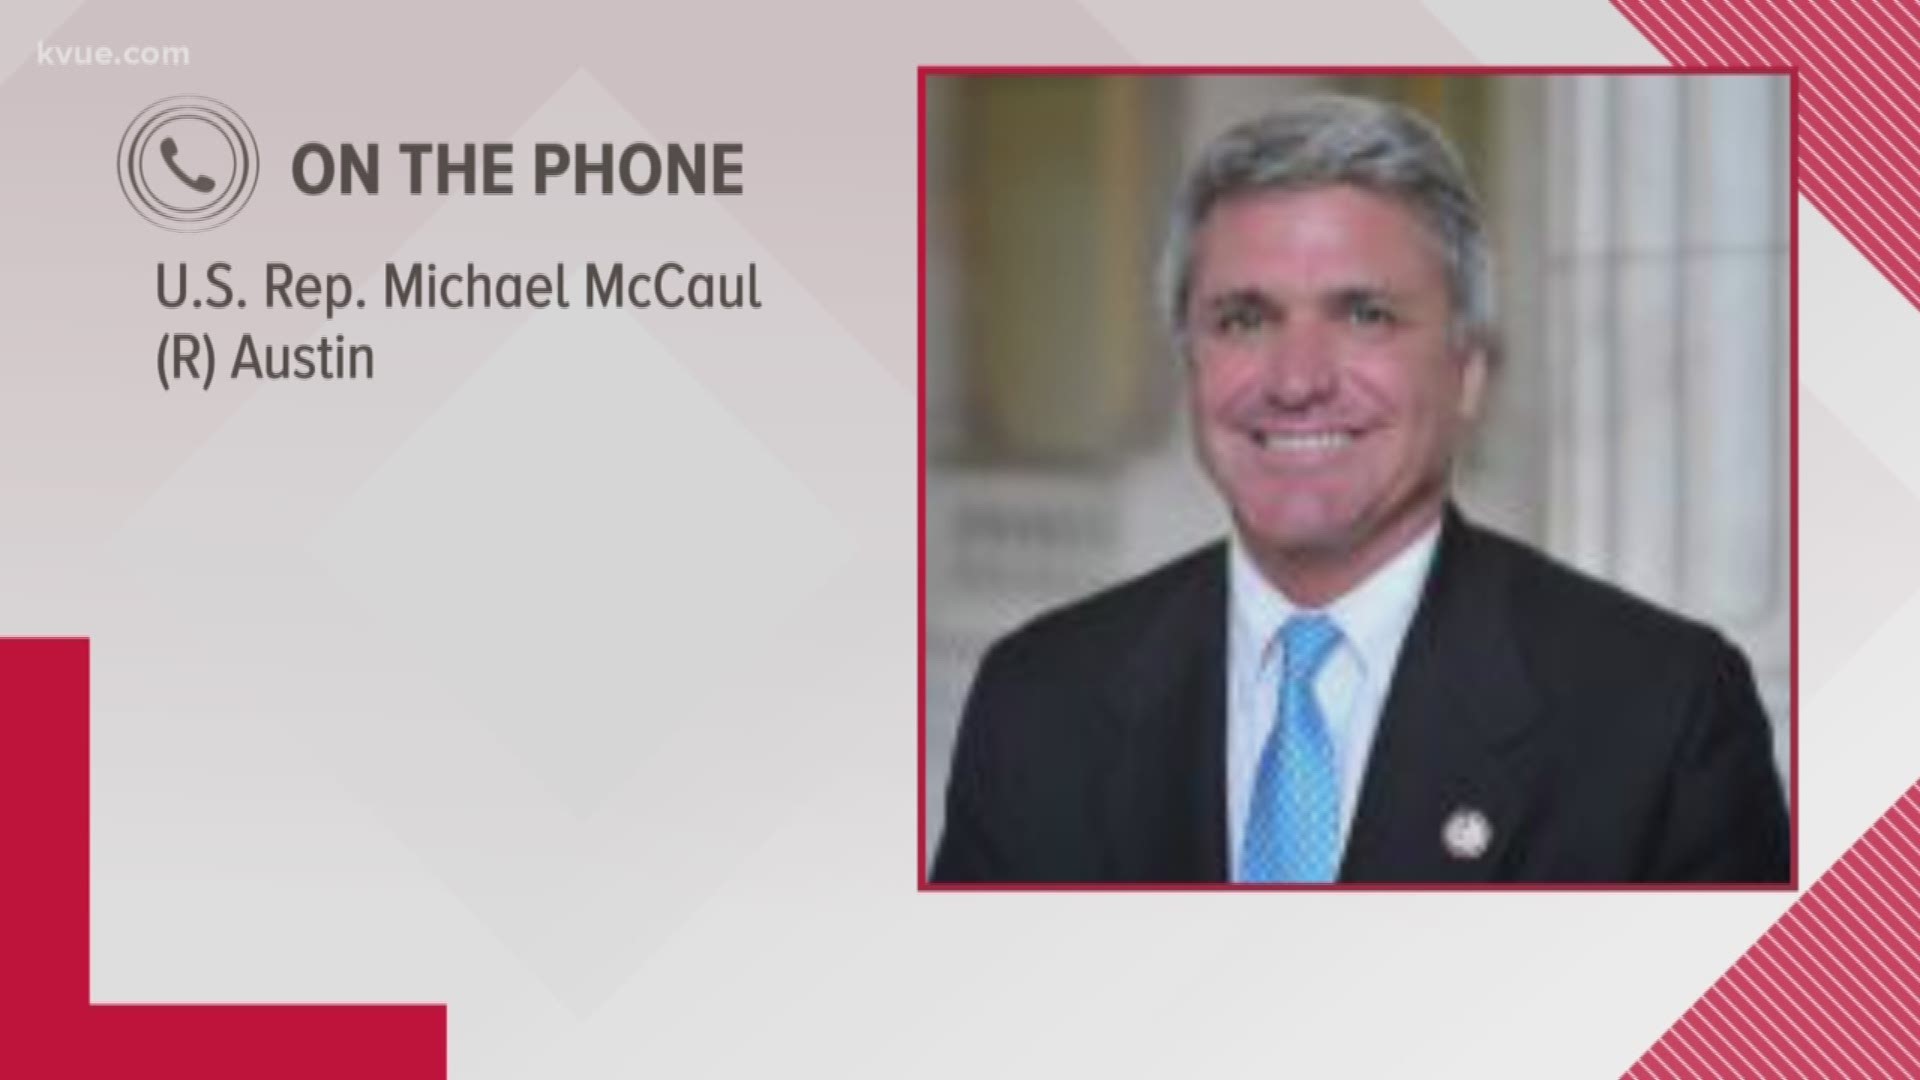 Texas Congressman Michael McCaul said he's proud of local, state and federal authorities' efforts in investigating the Austin bombing suspect.